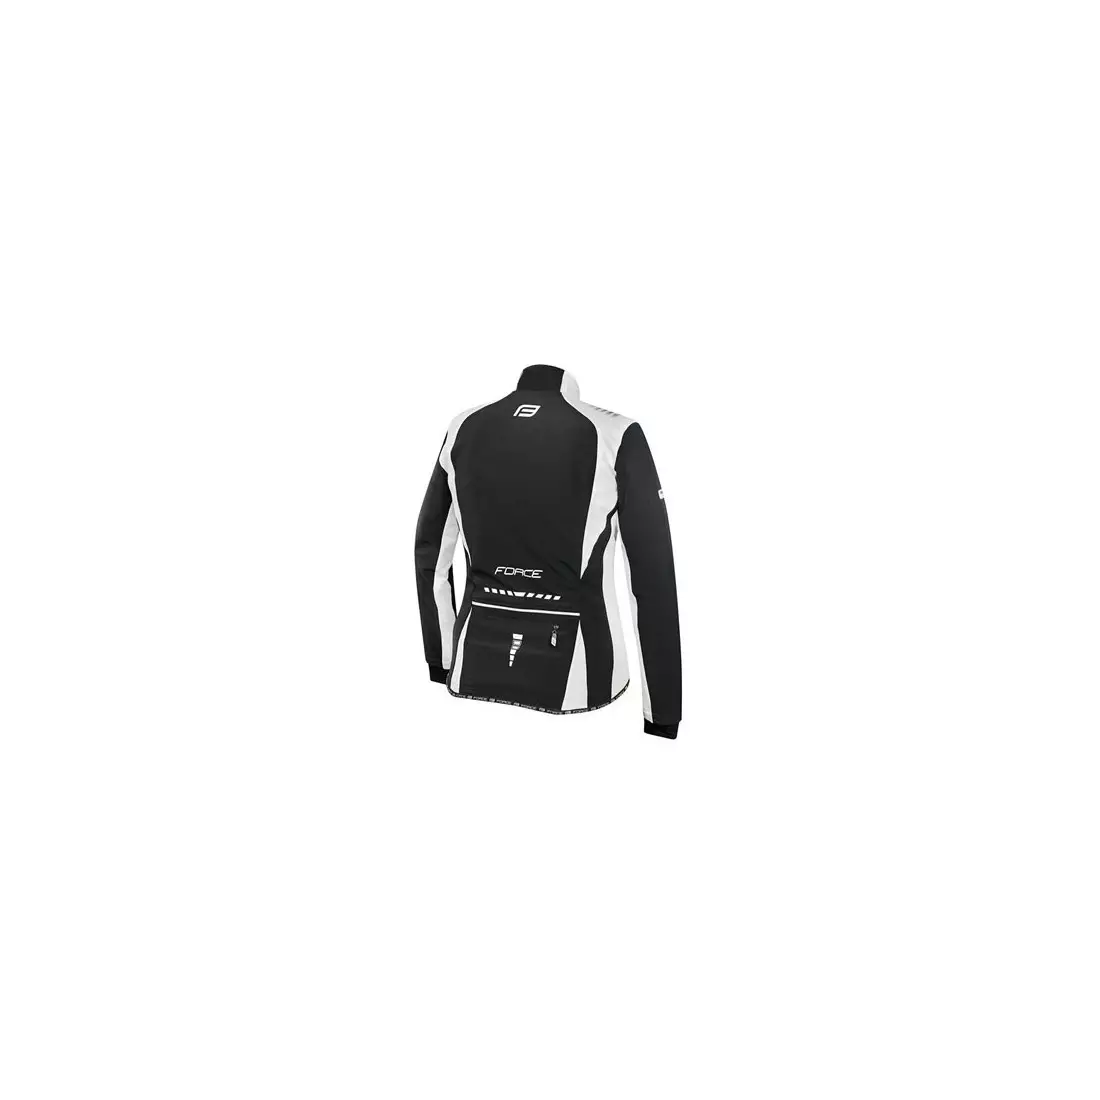 FORCE X71 women's softshell cycling jacket black and white 89991